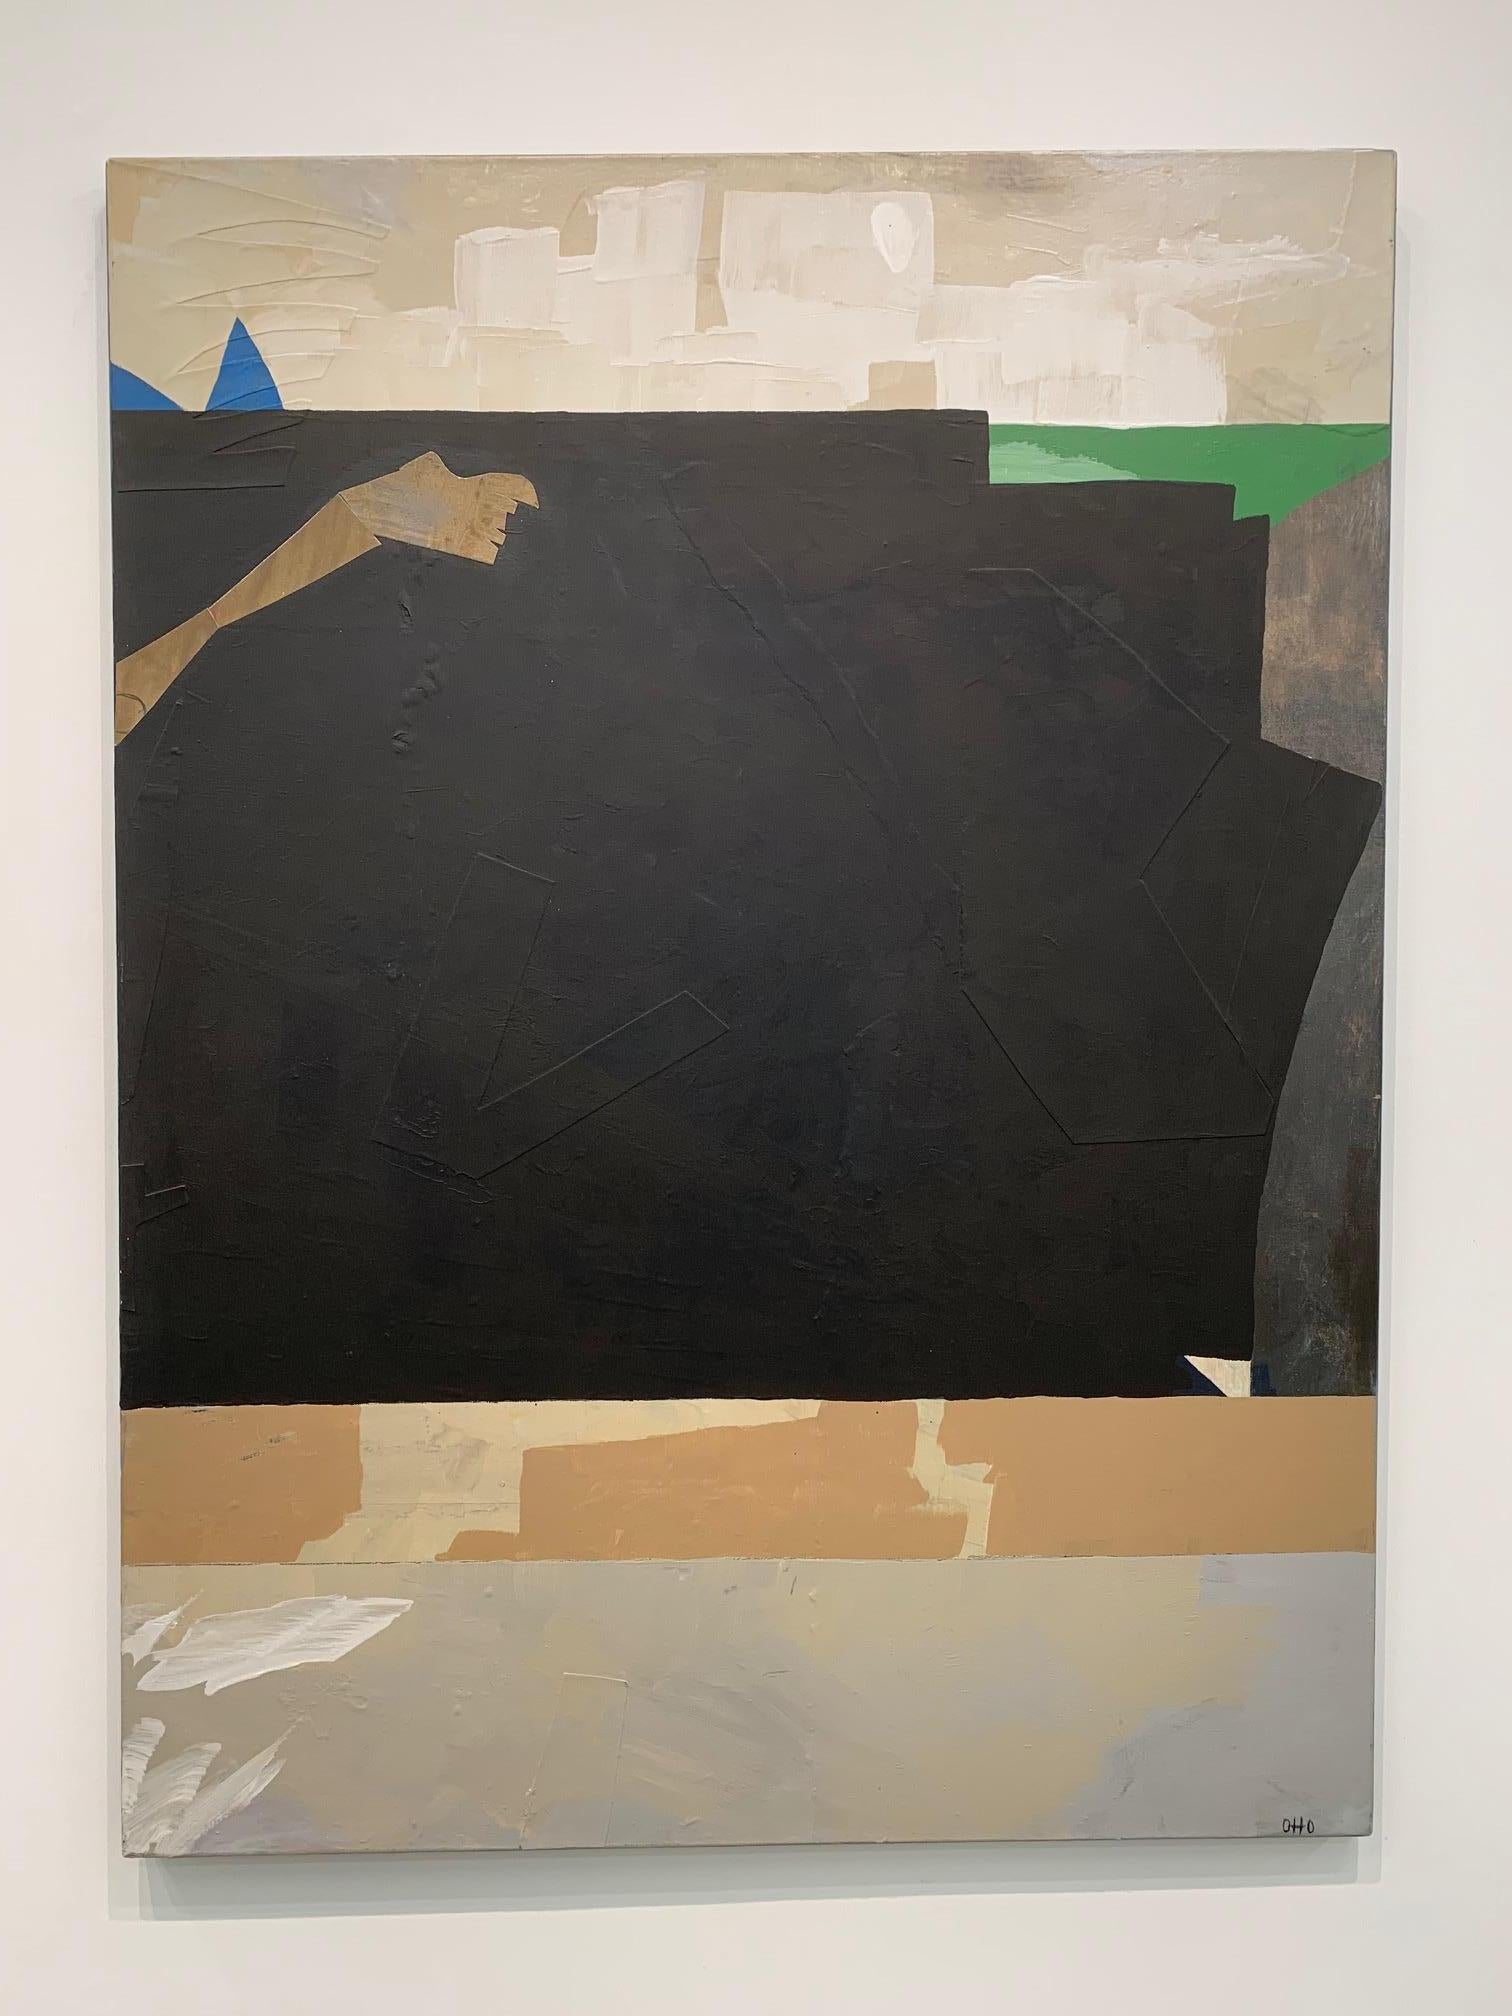 This contemporary, abstract painting by Otto Rogers, depicts a geometric landscape using neutral and earth colour tones. The application of paint to the canvas is full of texture. 

Otto Rogers was born in 1935 in Kerrobert, Saskatchewan. He